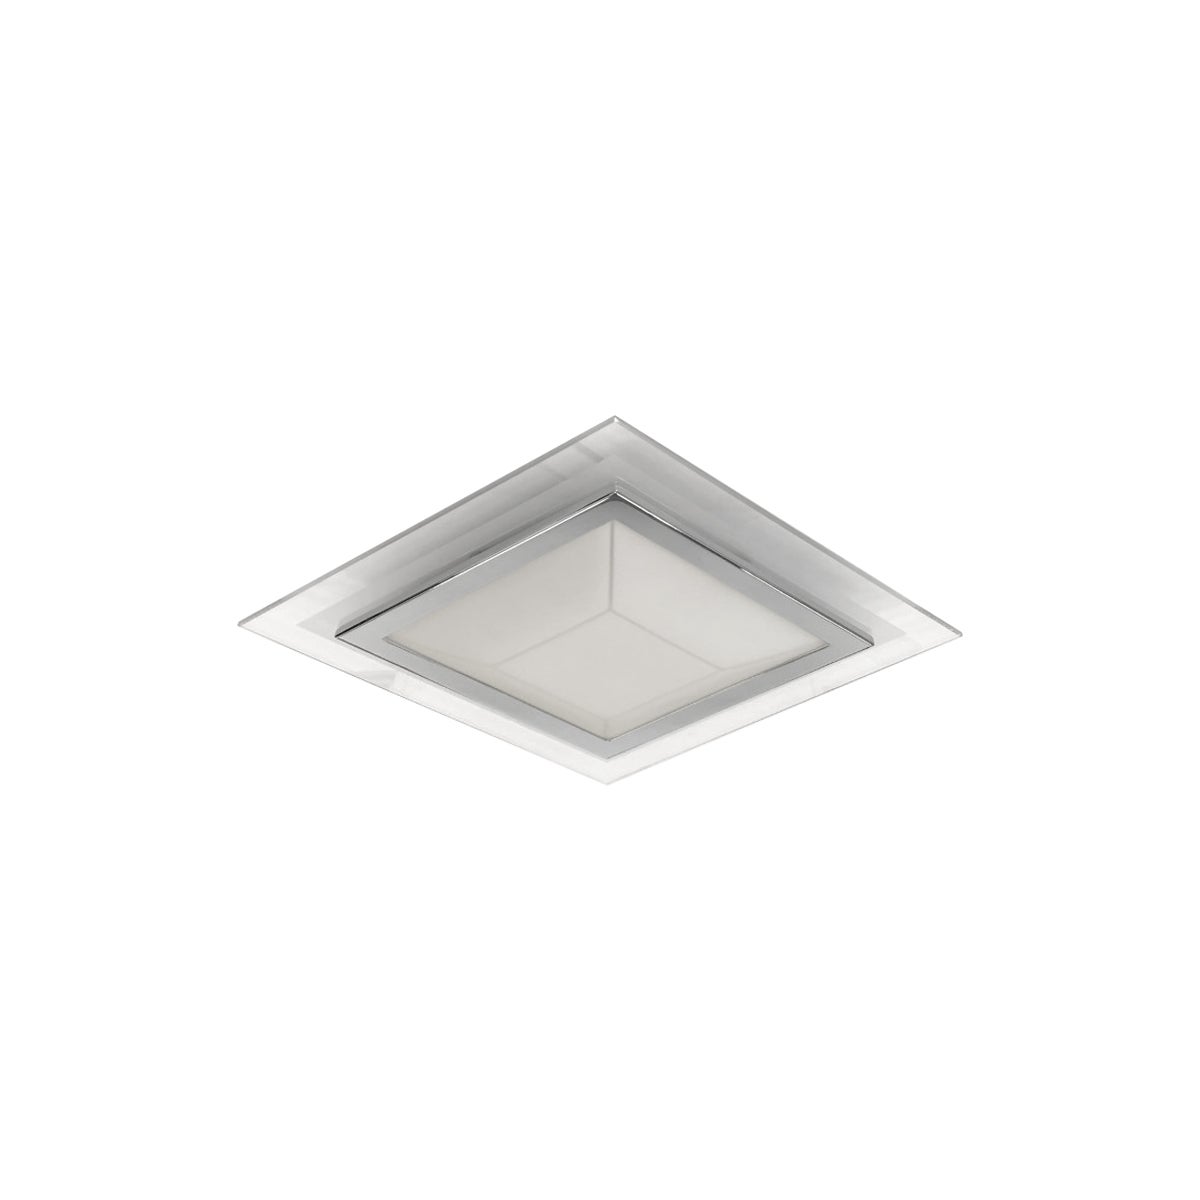 """Pyramid 15"""" Ceiling Mount in Chrome"""